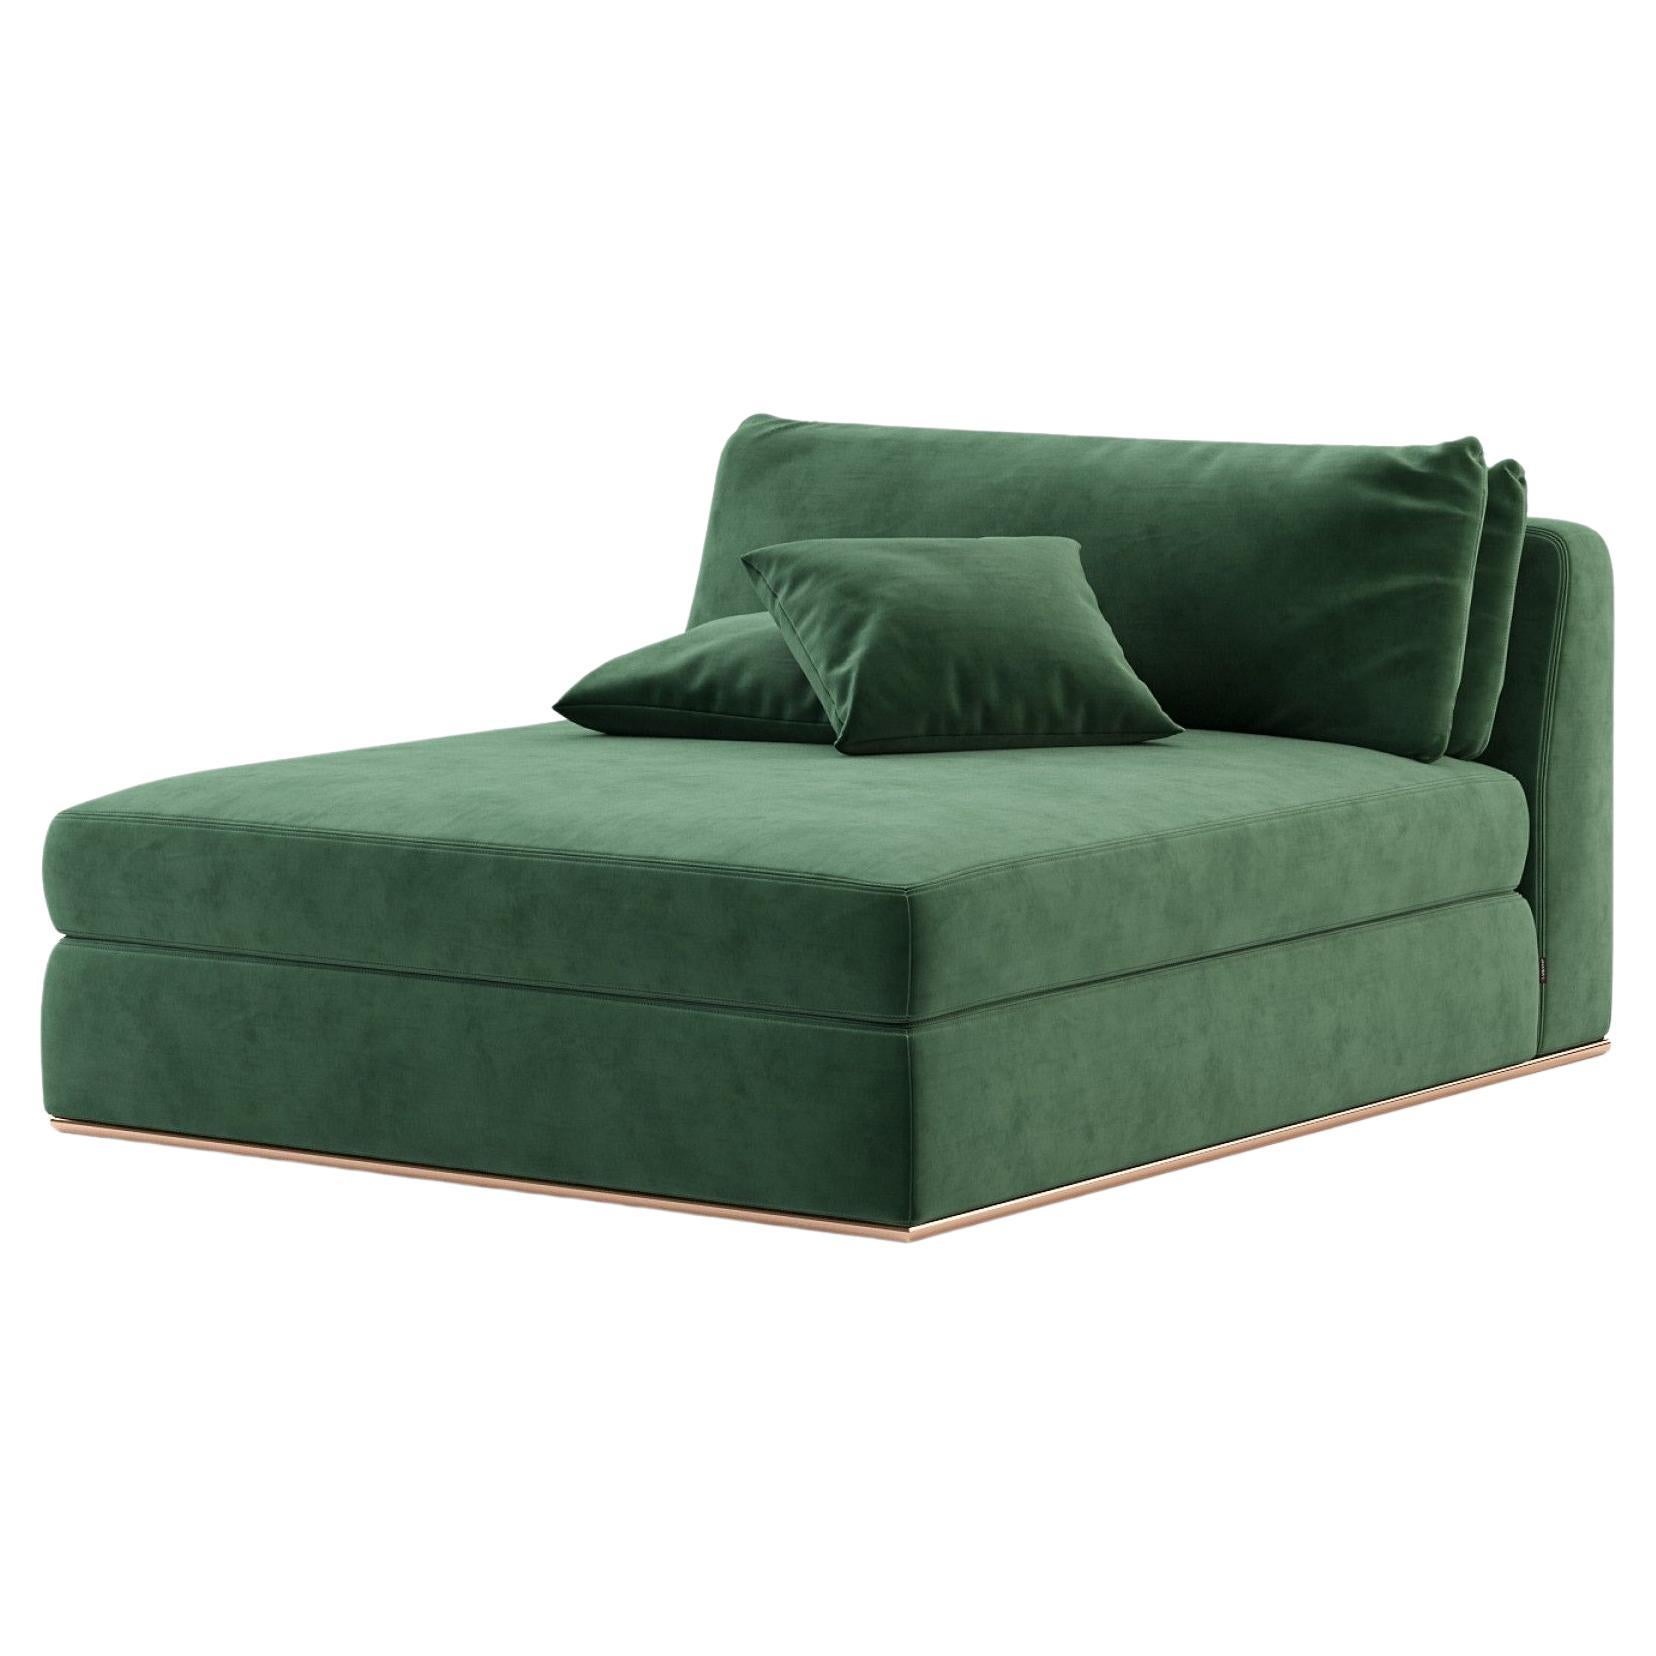 Extra Wide 55" Chaise Longue Offered In Rich Velvet For Sale at 1stDibs |  extra wide chaise lounge, extra wide lounge chair, extra wide chaise lounge  chair